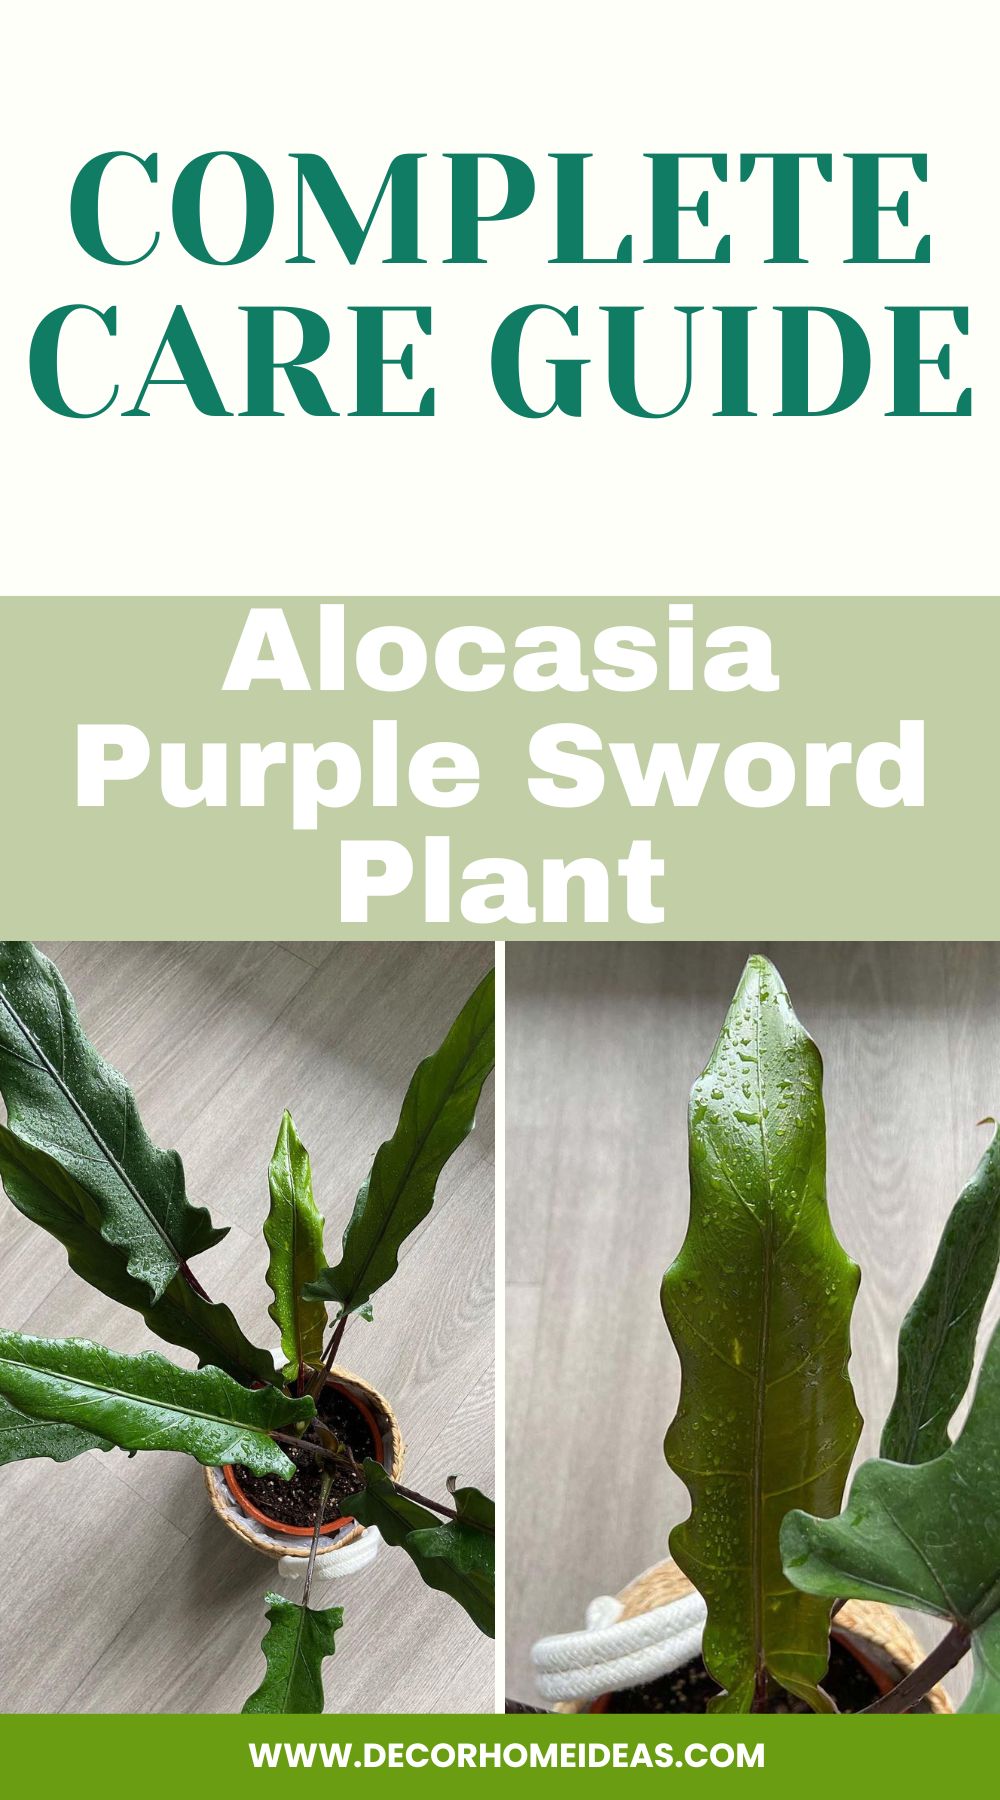 Discover the beauty and elegance of the Alocasia Purple Sword plant with this complete care guide. Explore its unique characteristics and learn essential tips to successfully nurture and maintain this stunning tropical plant in your home or garden.